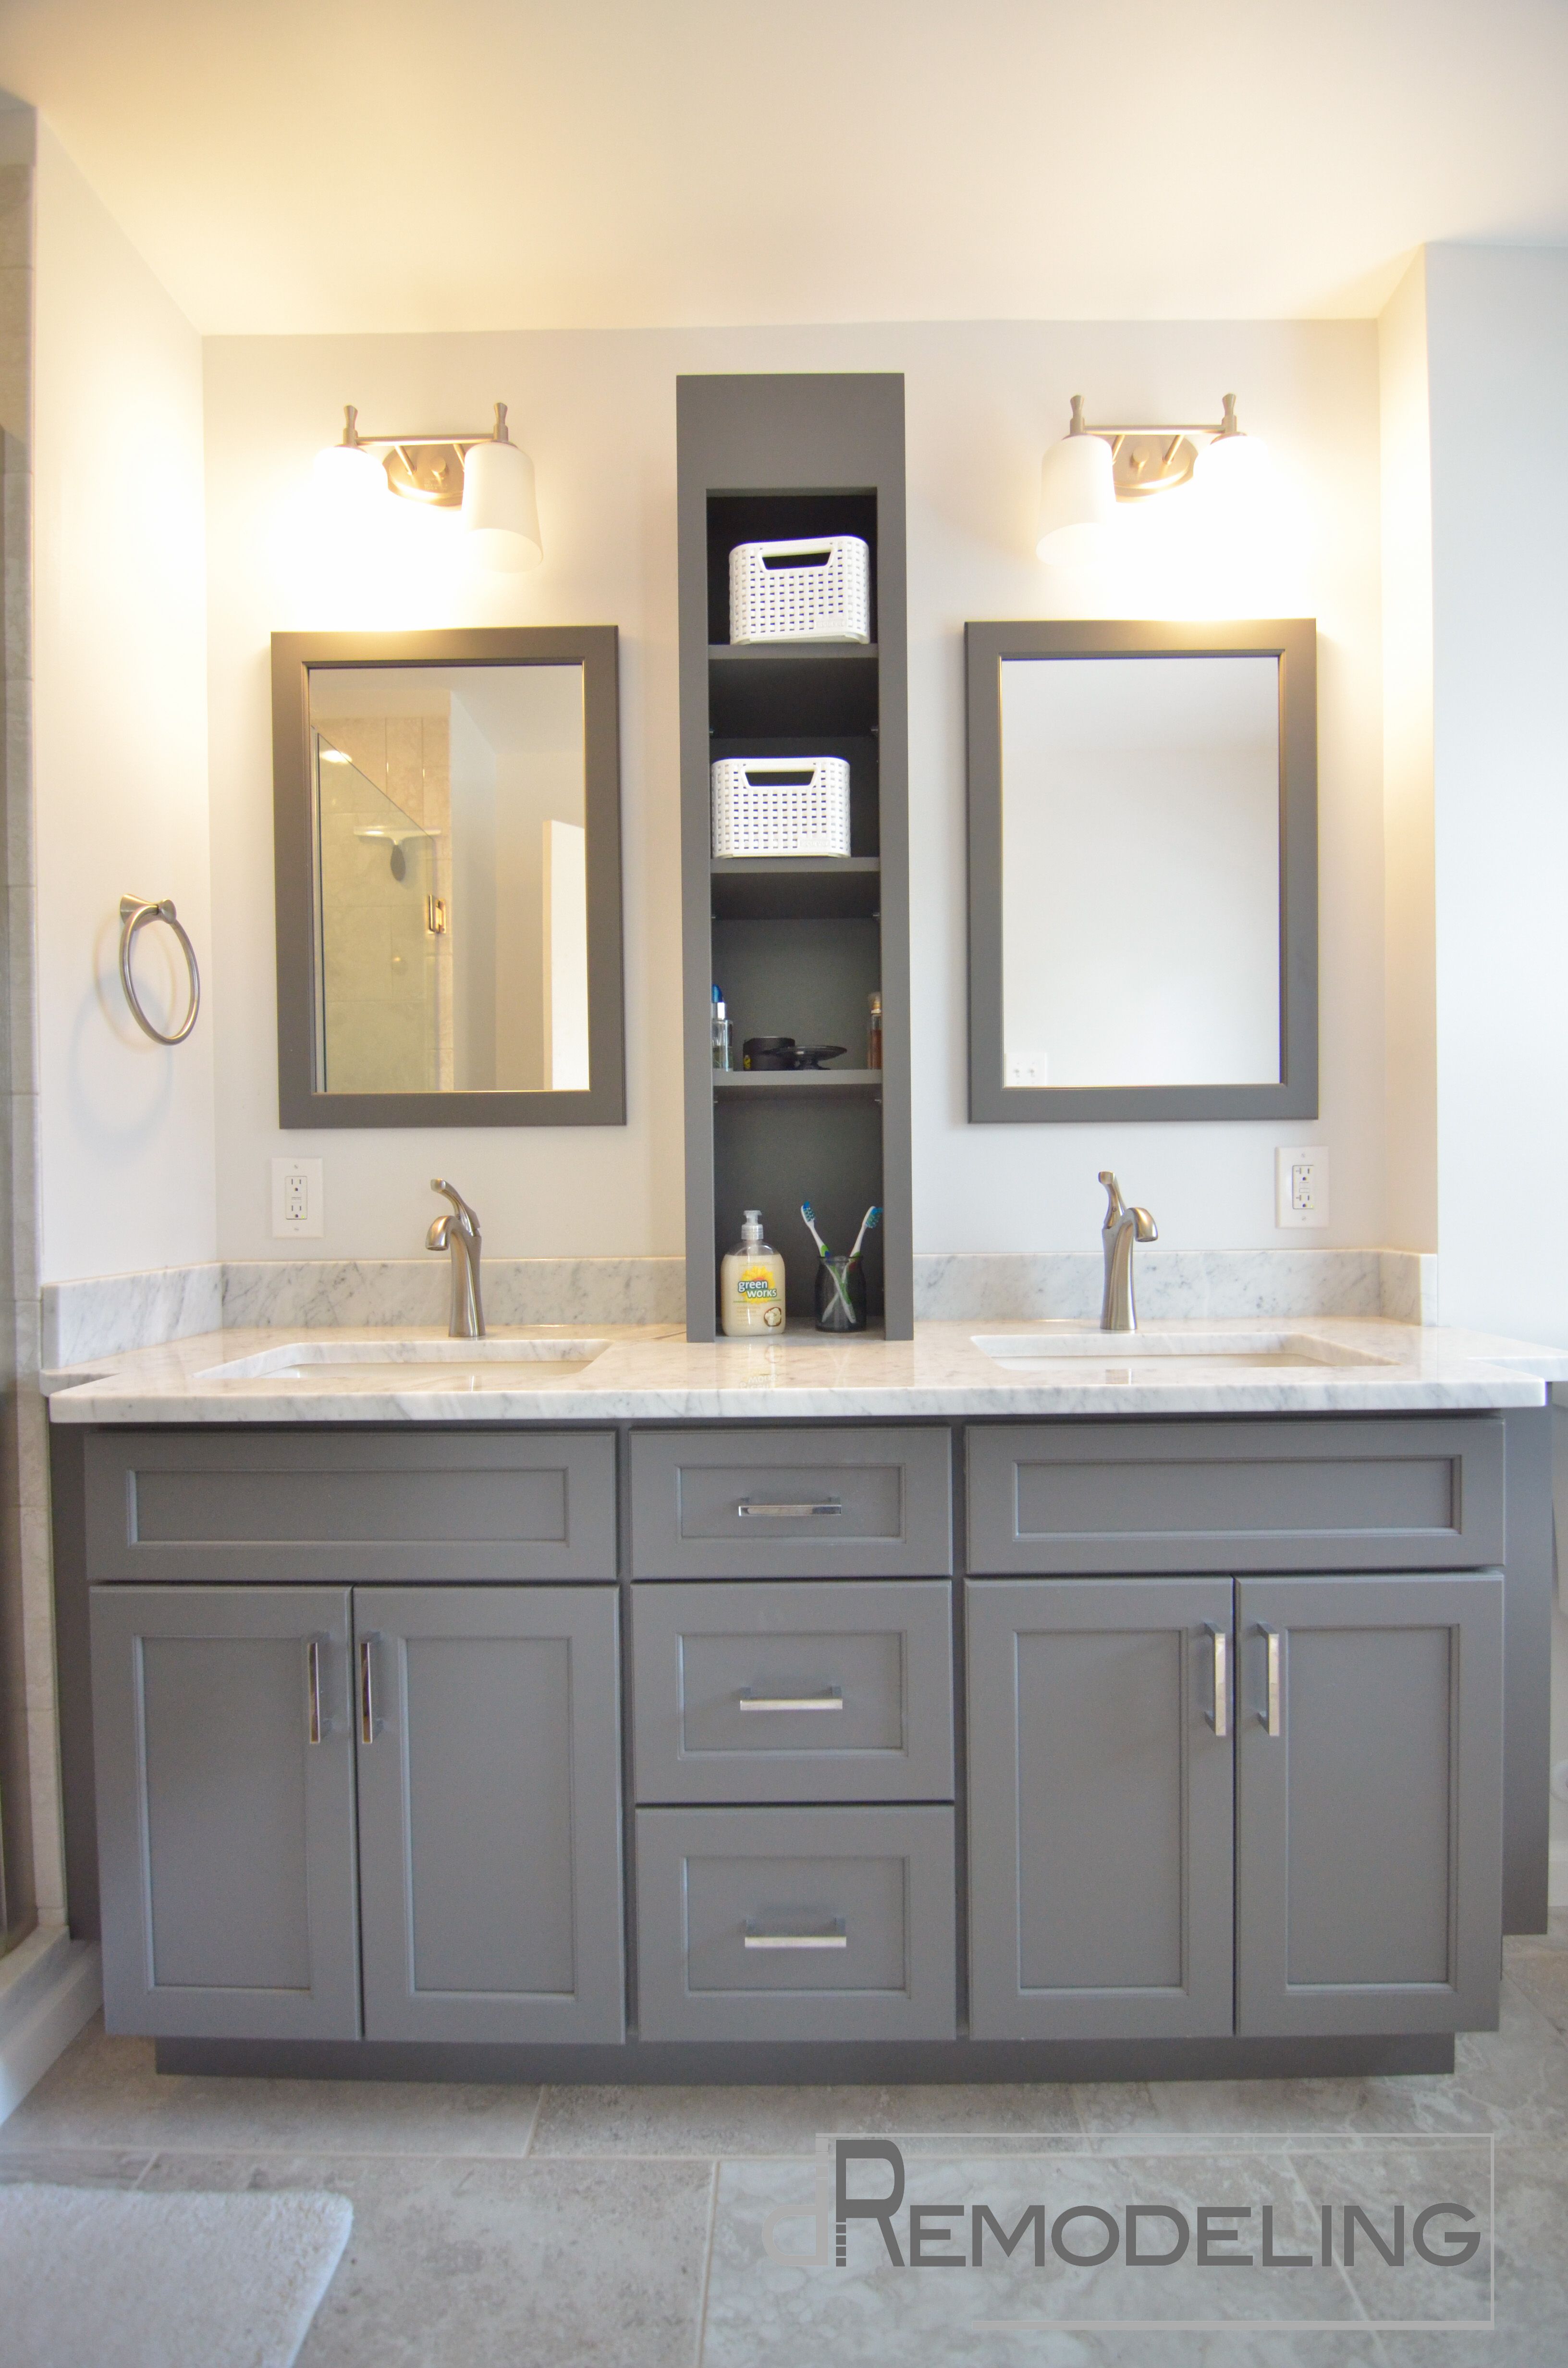 Bathroom Double Mirror Bathroom Interesting On Throughout There Are Plenty Of Beneficial Tips For Your Woodworking 0 Double Mirror Bathroom